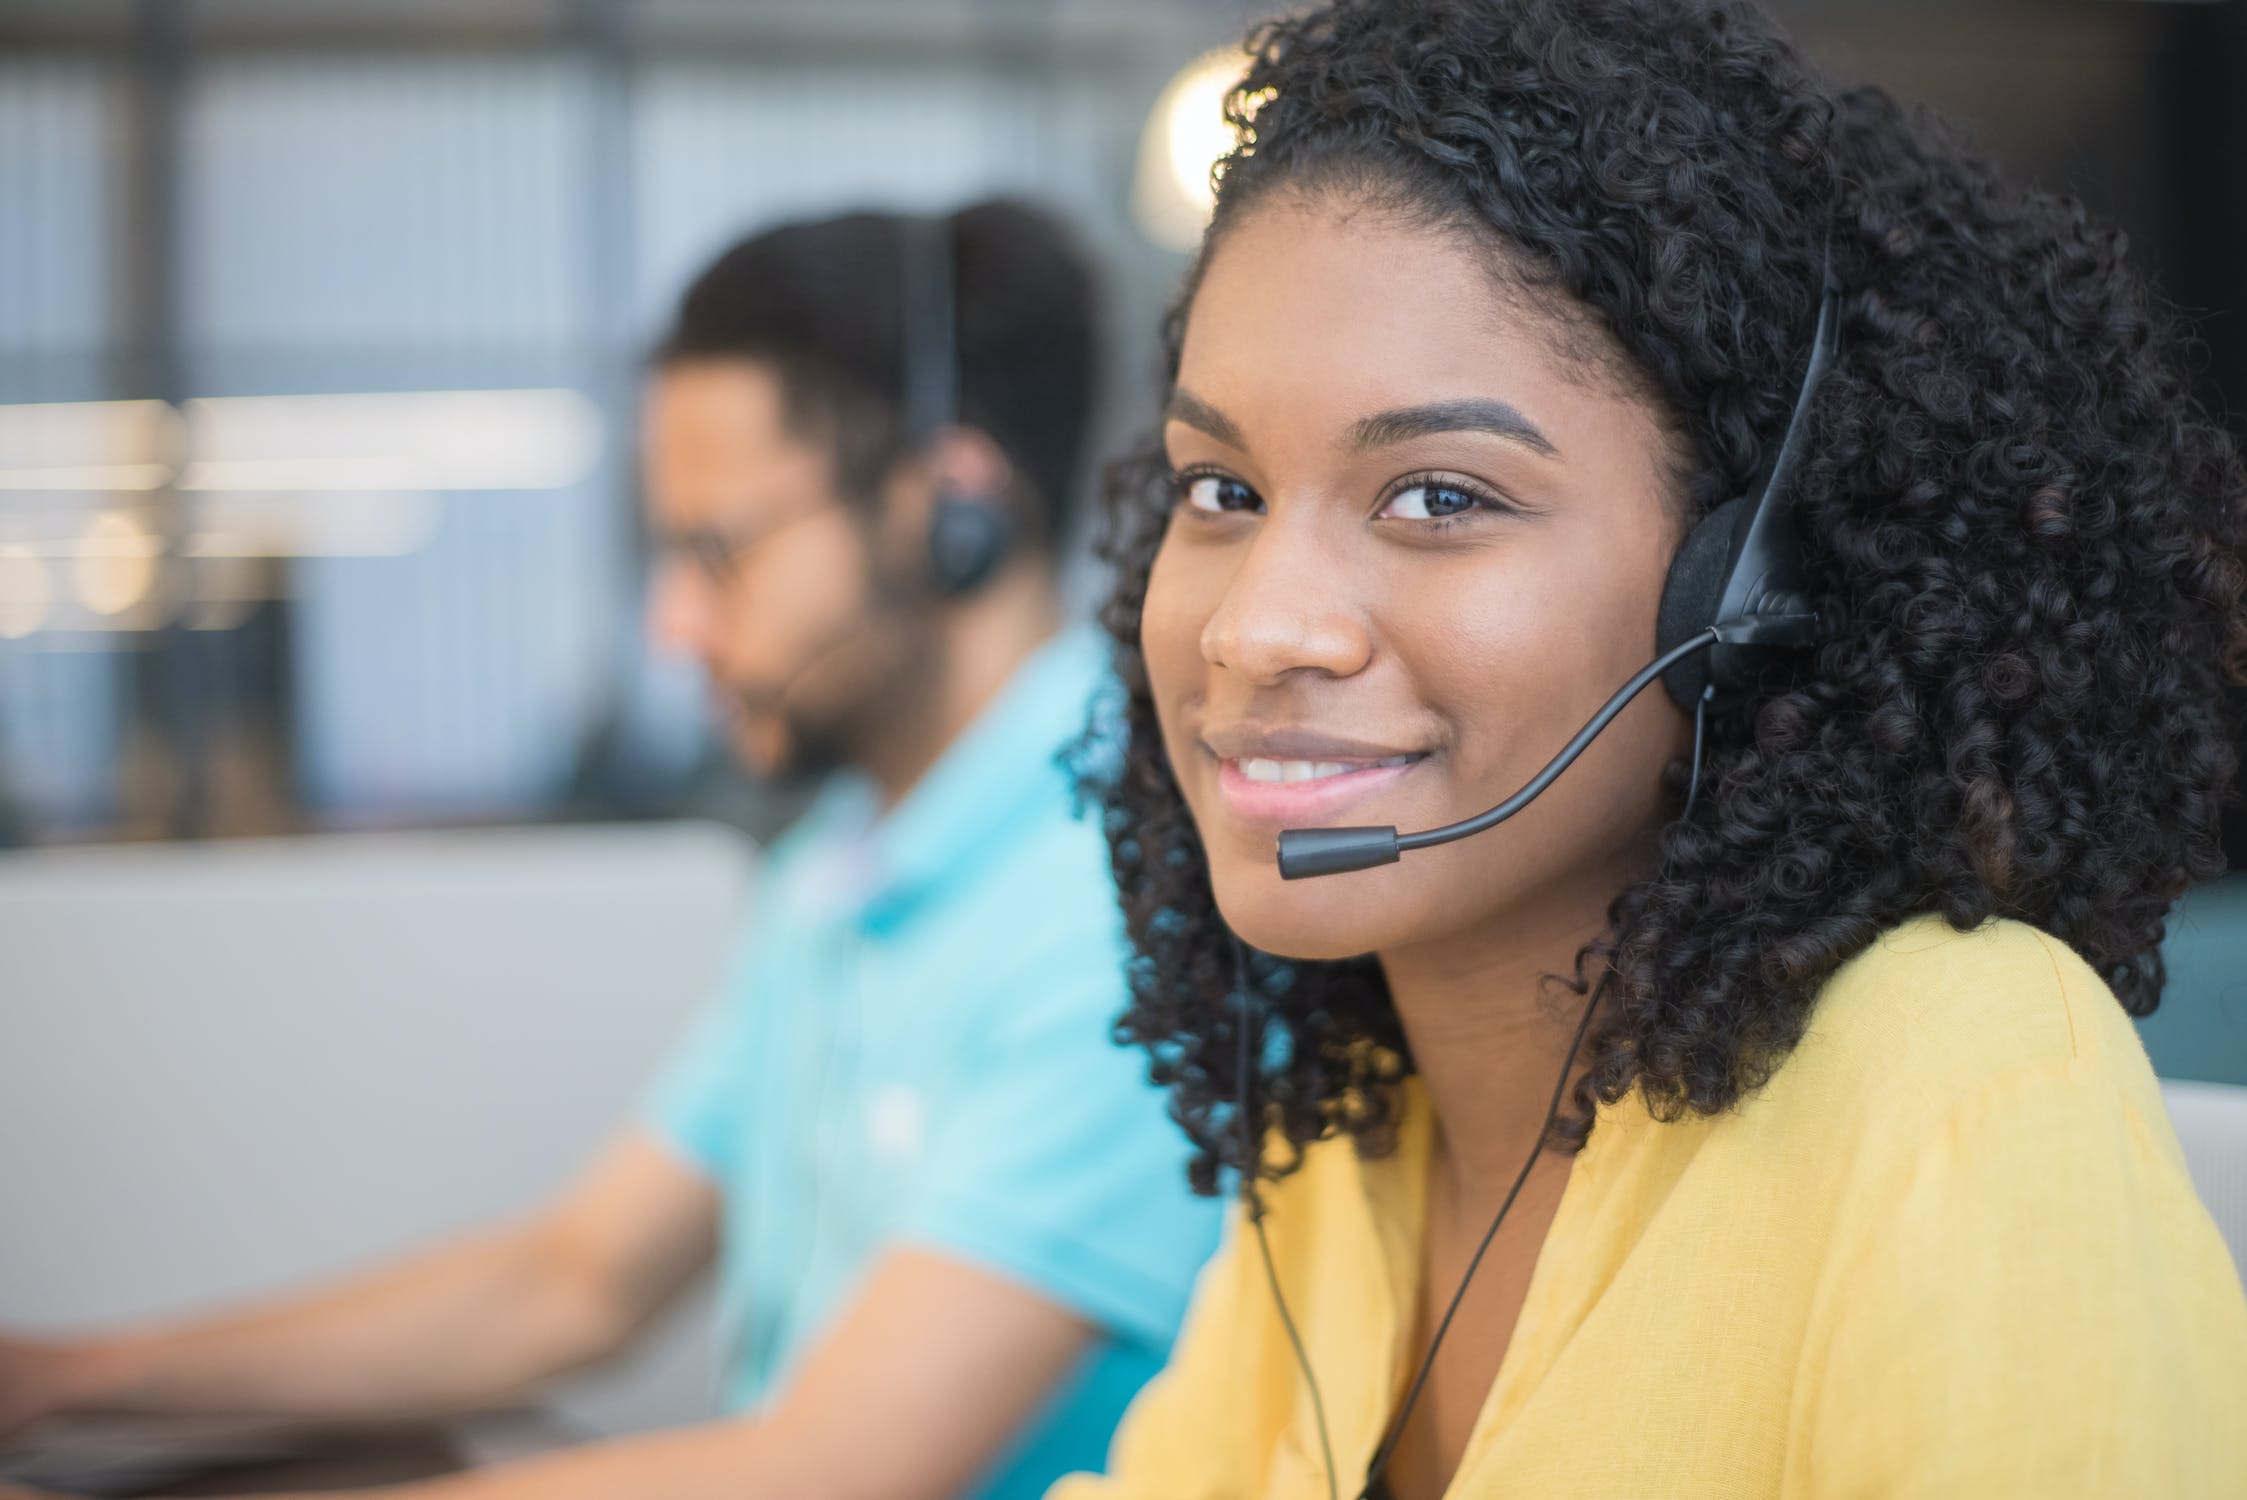 a call center woman with a headset wearing a yellow blouse with another call center employee in the background